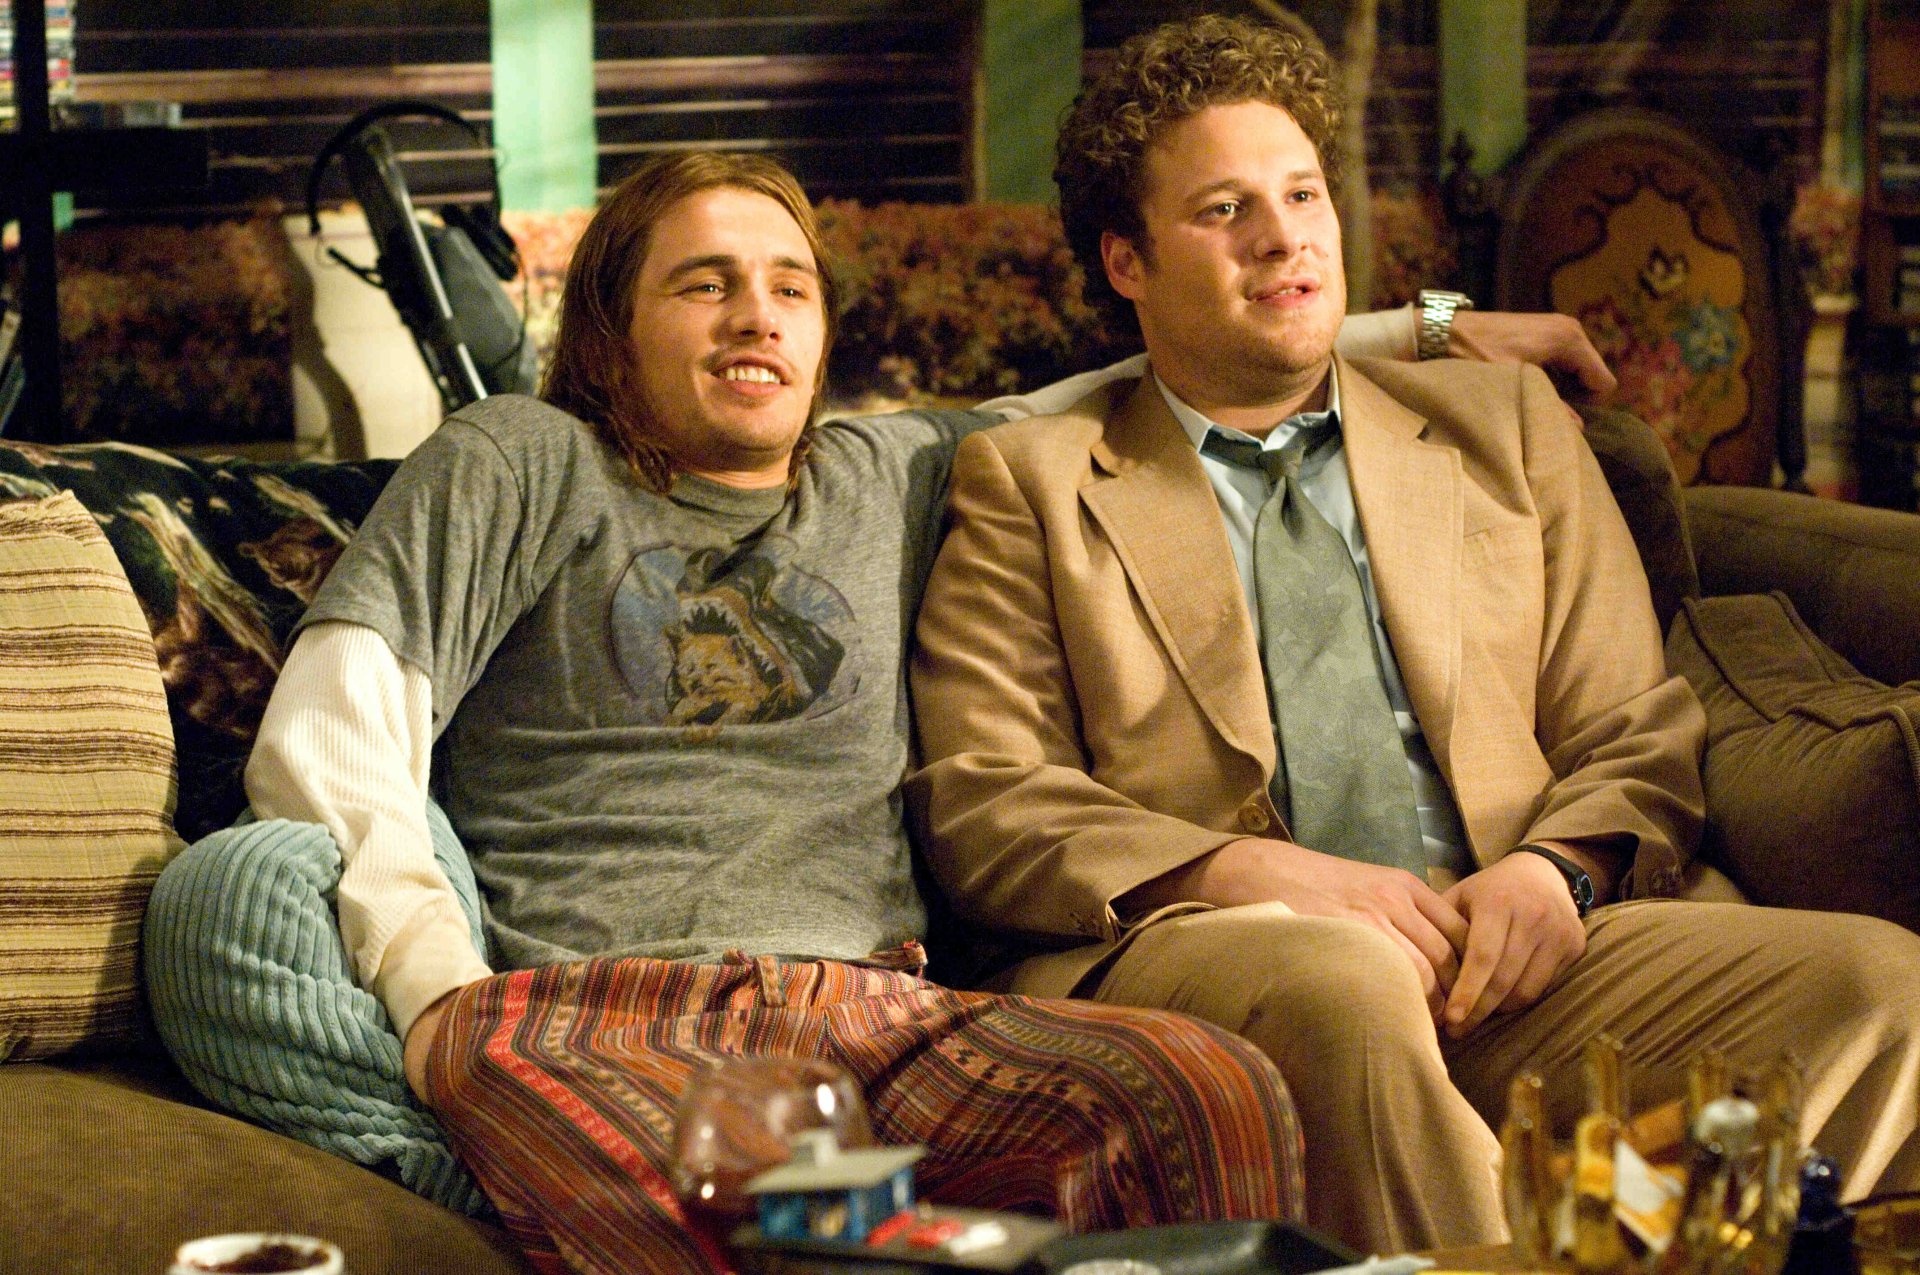 Seth Rogen, HD Wallpapers, Background Images, Comedy Movies, 1920x1280 HD Desktop